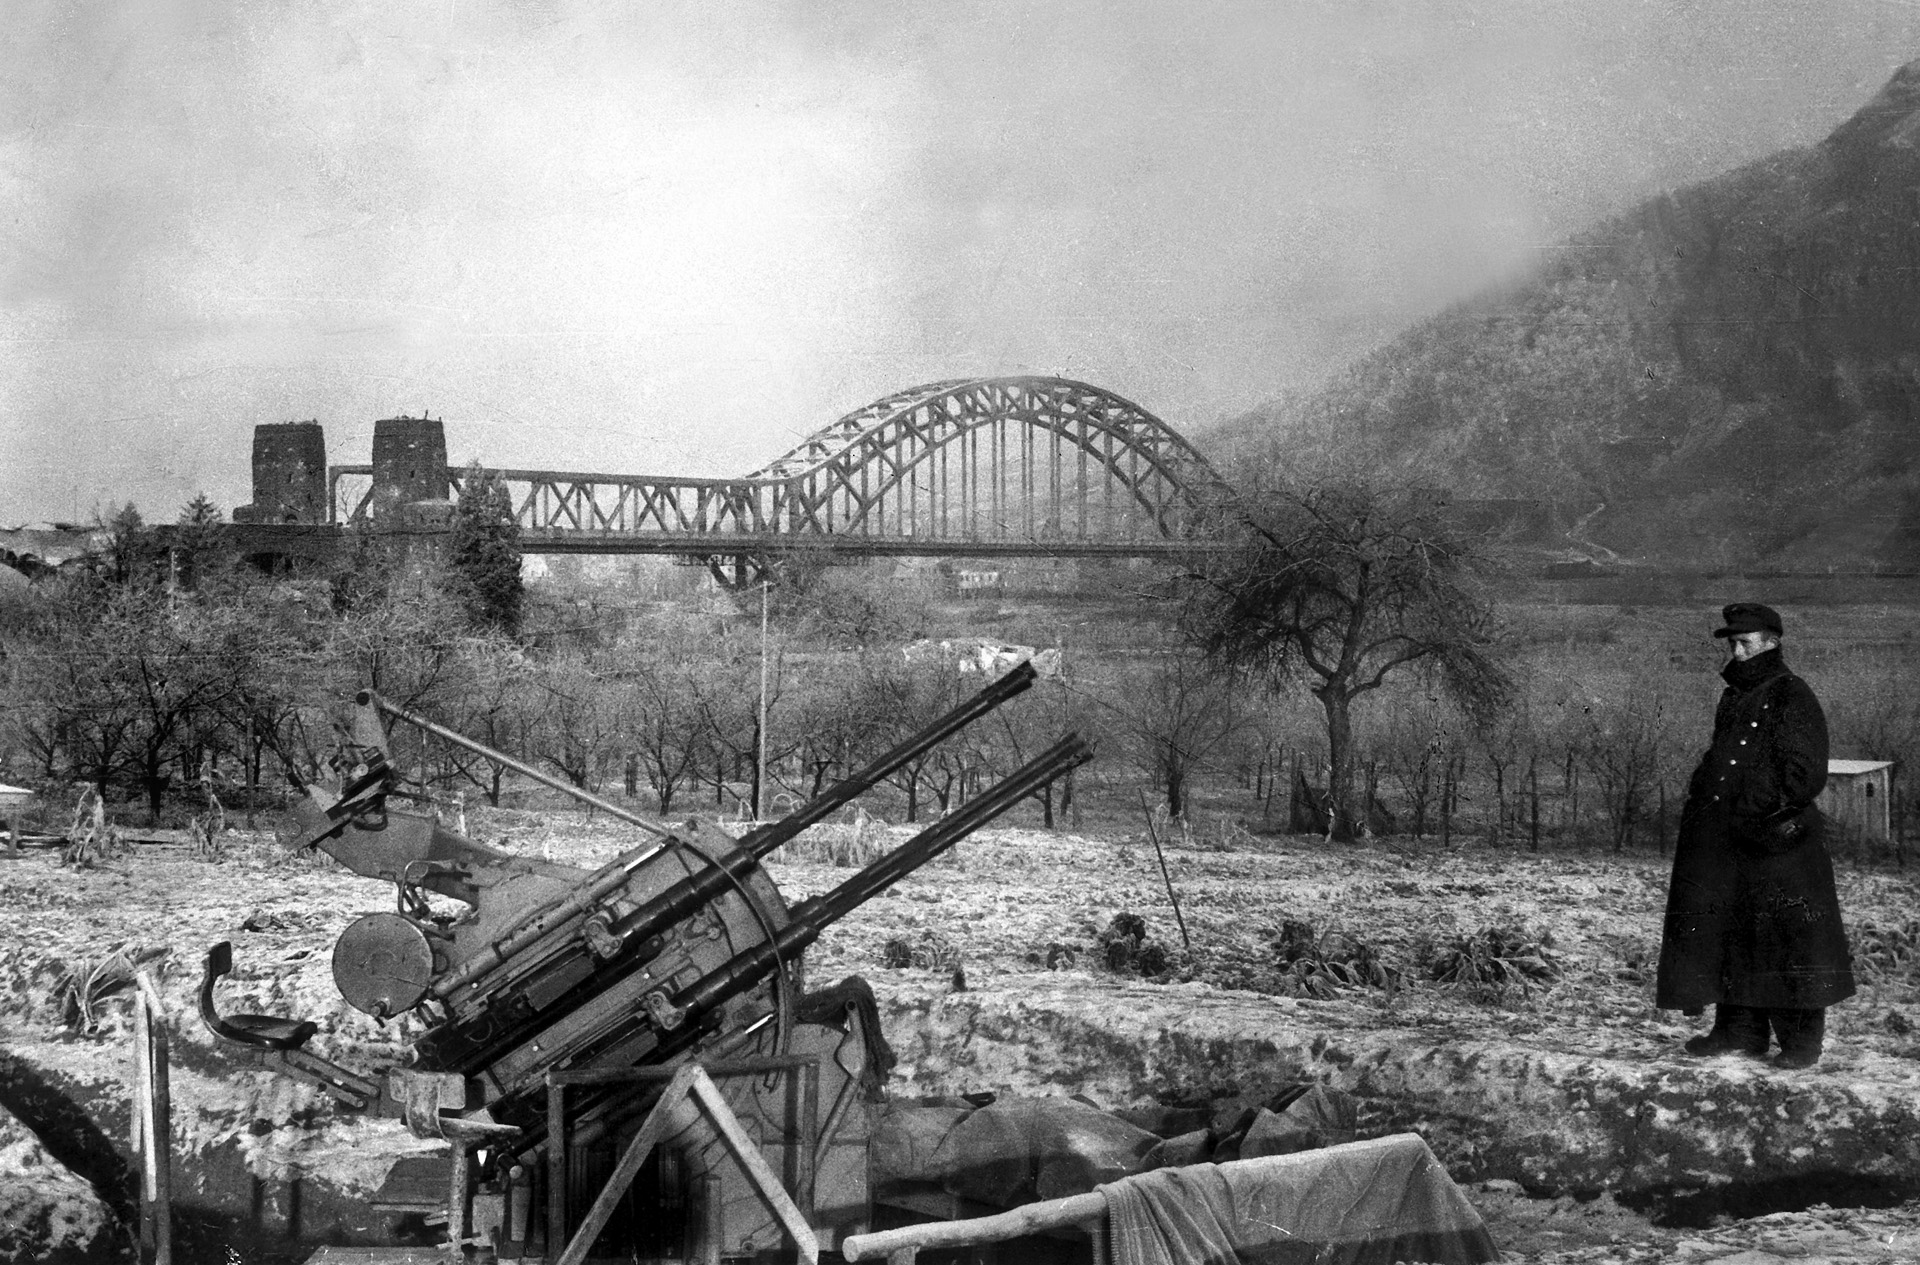 With the Ludendorff railroad bridge in the distance, a German soldier inspects an antiaircraft gun position on the east bank of the Rhine in January 1945. Weeks later, elements of the U.S. First Army were using the bridge to cross into Germany.